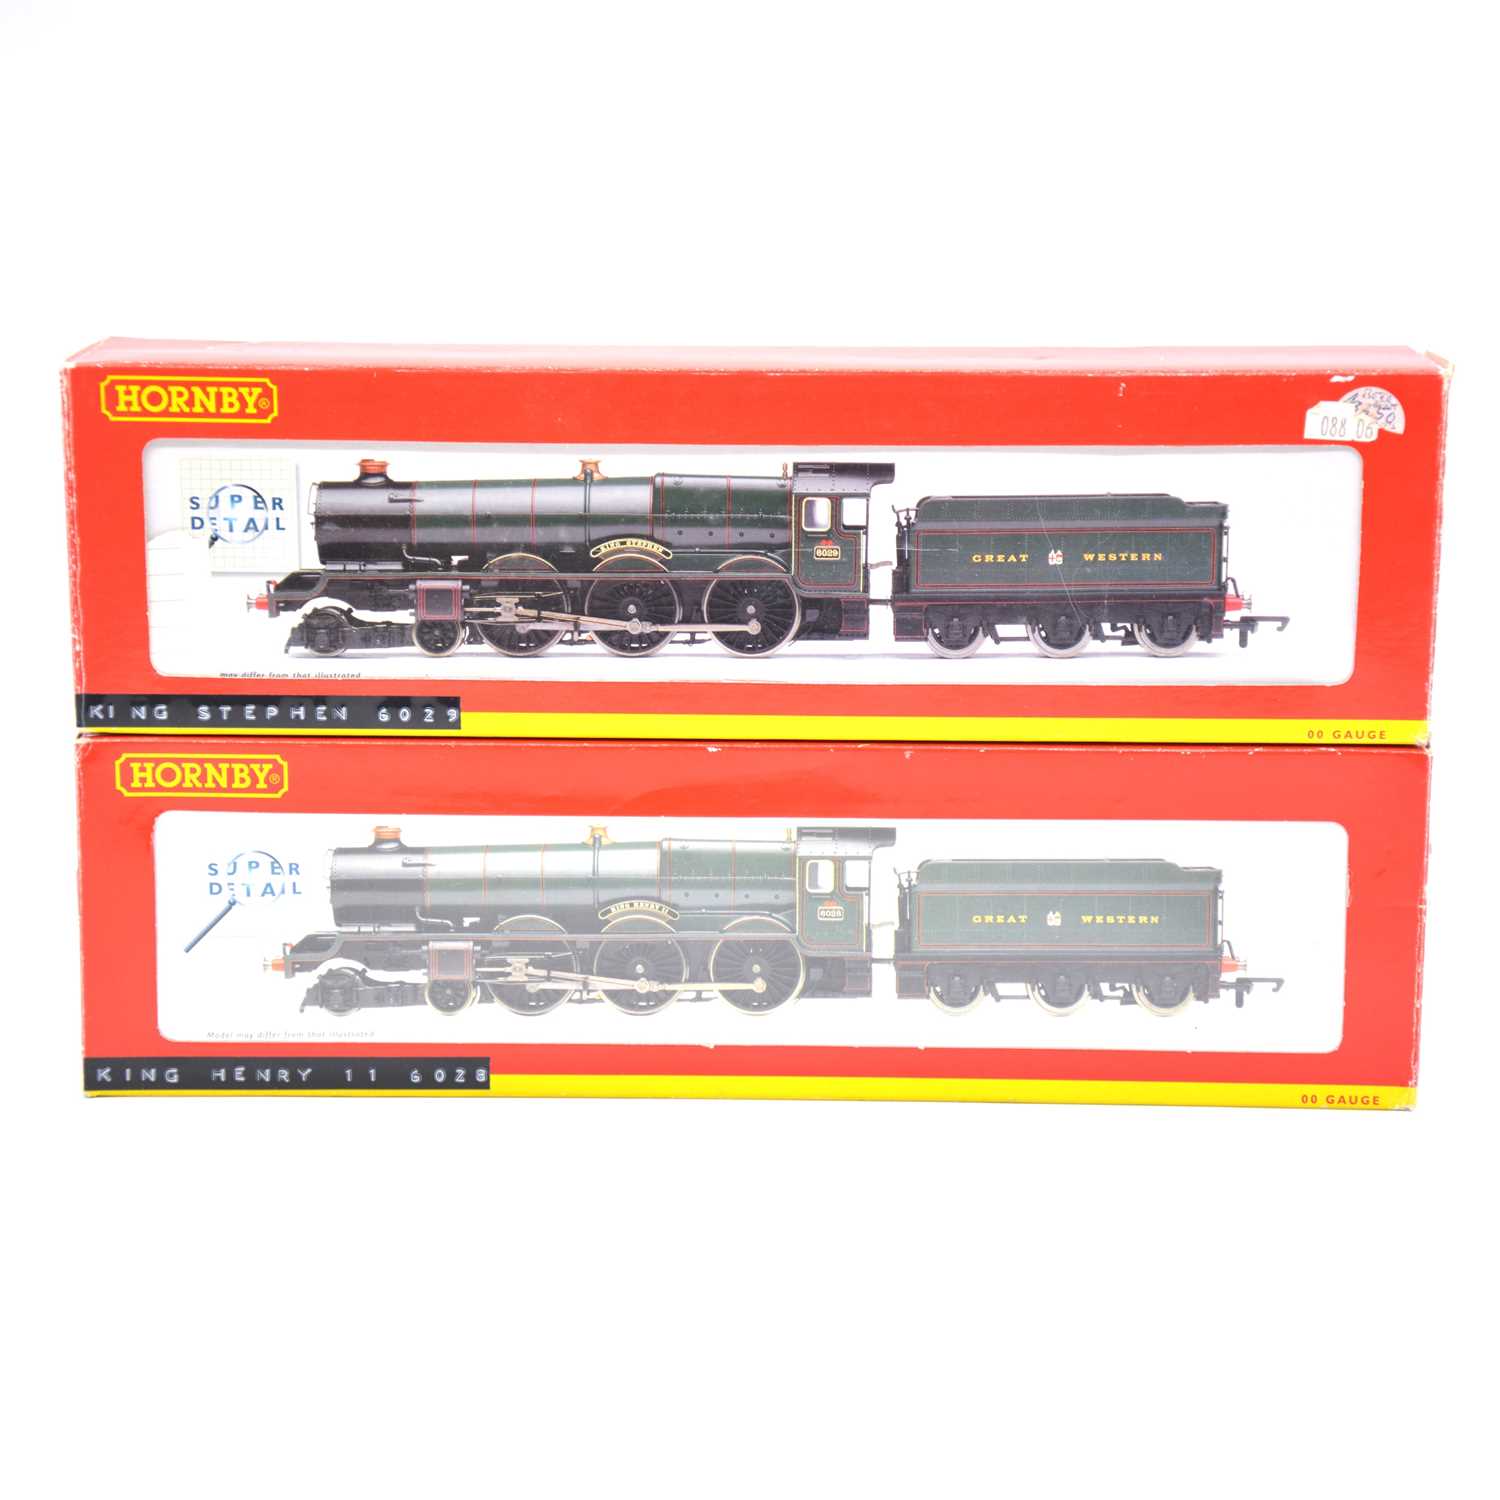 Lot 188 - Two Hornby OO gauge model railway steam locomotives with tenders, DCC fitted, boxed